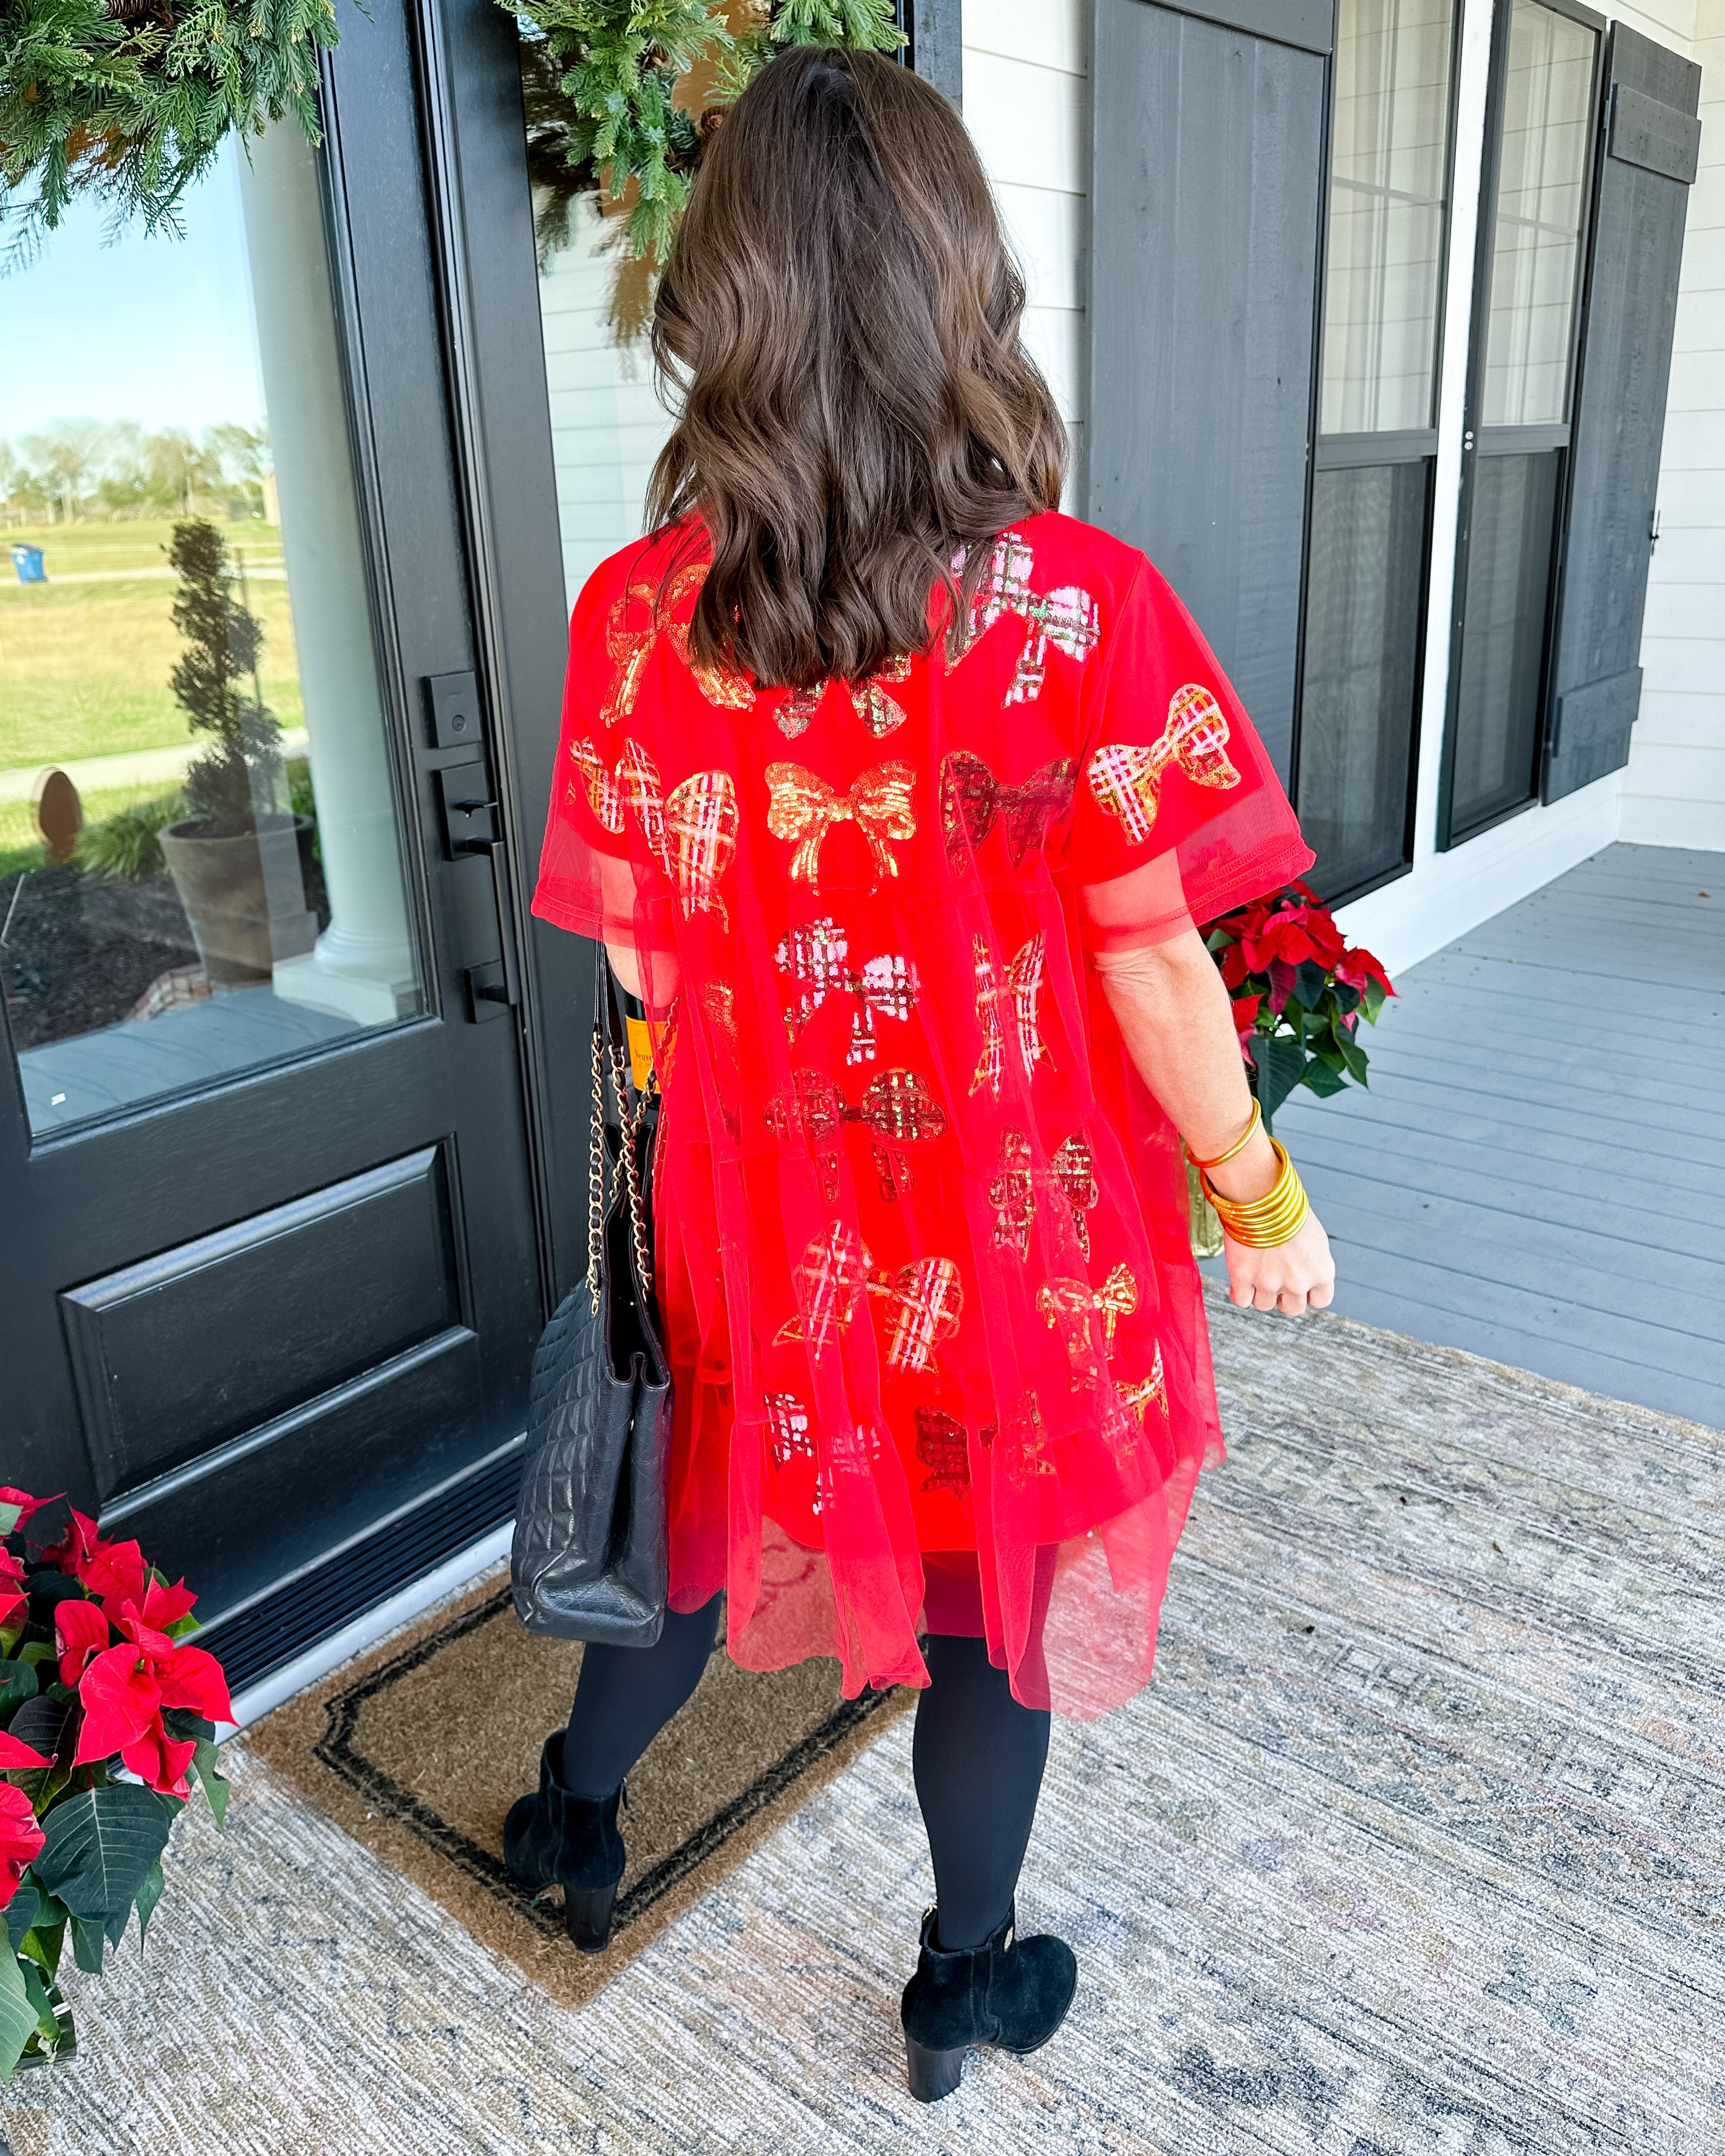 Red Sheer Plaid Bow Overlay dress